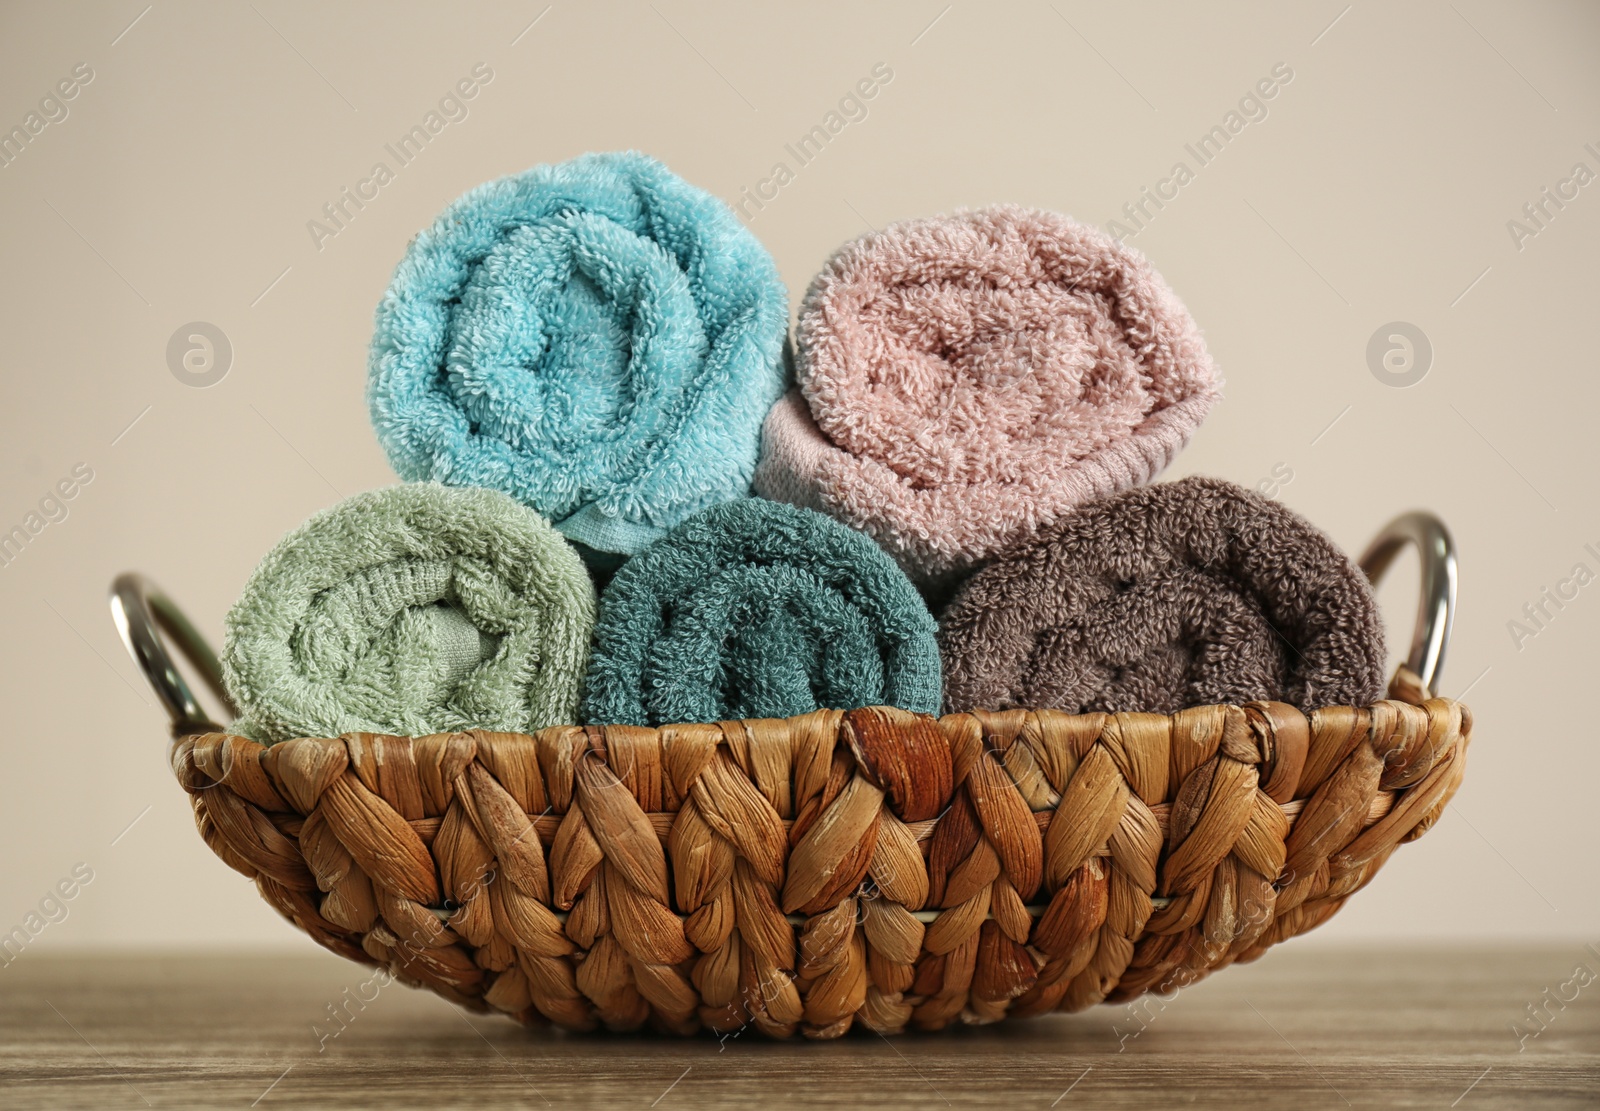 Photo of Wicker basket with rolled bath towels on wooden table